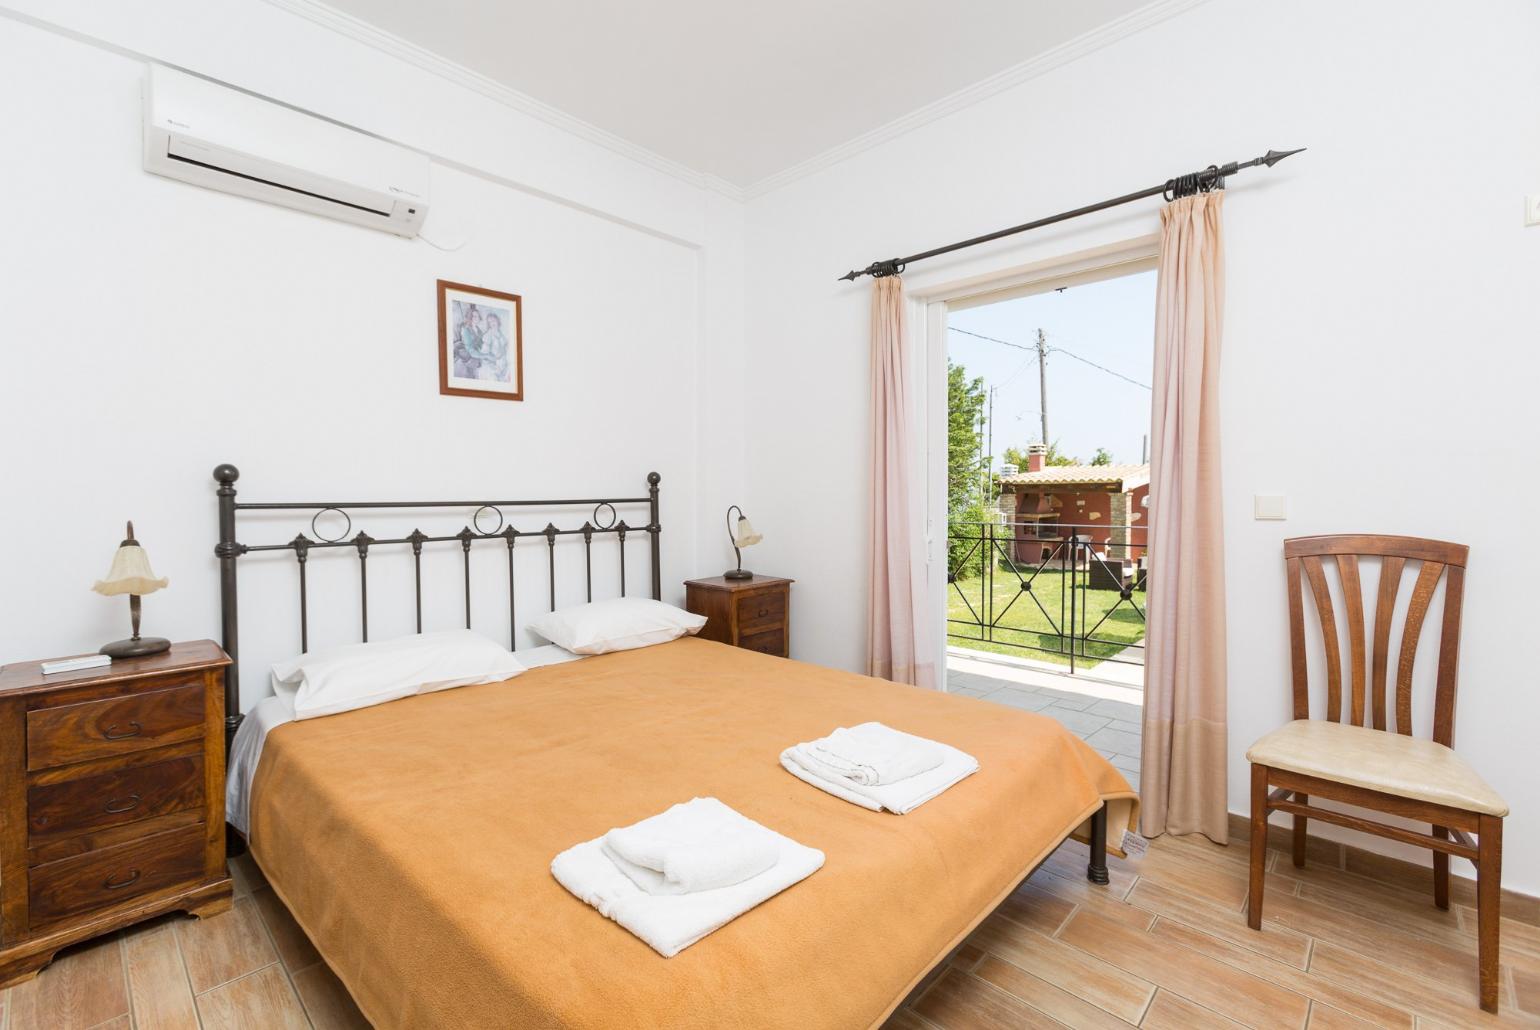 Double bedroom on ground floor with en suite bathroom, A/C, and terrace access